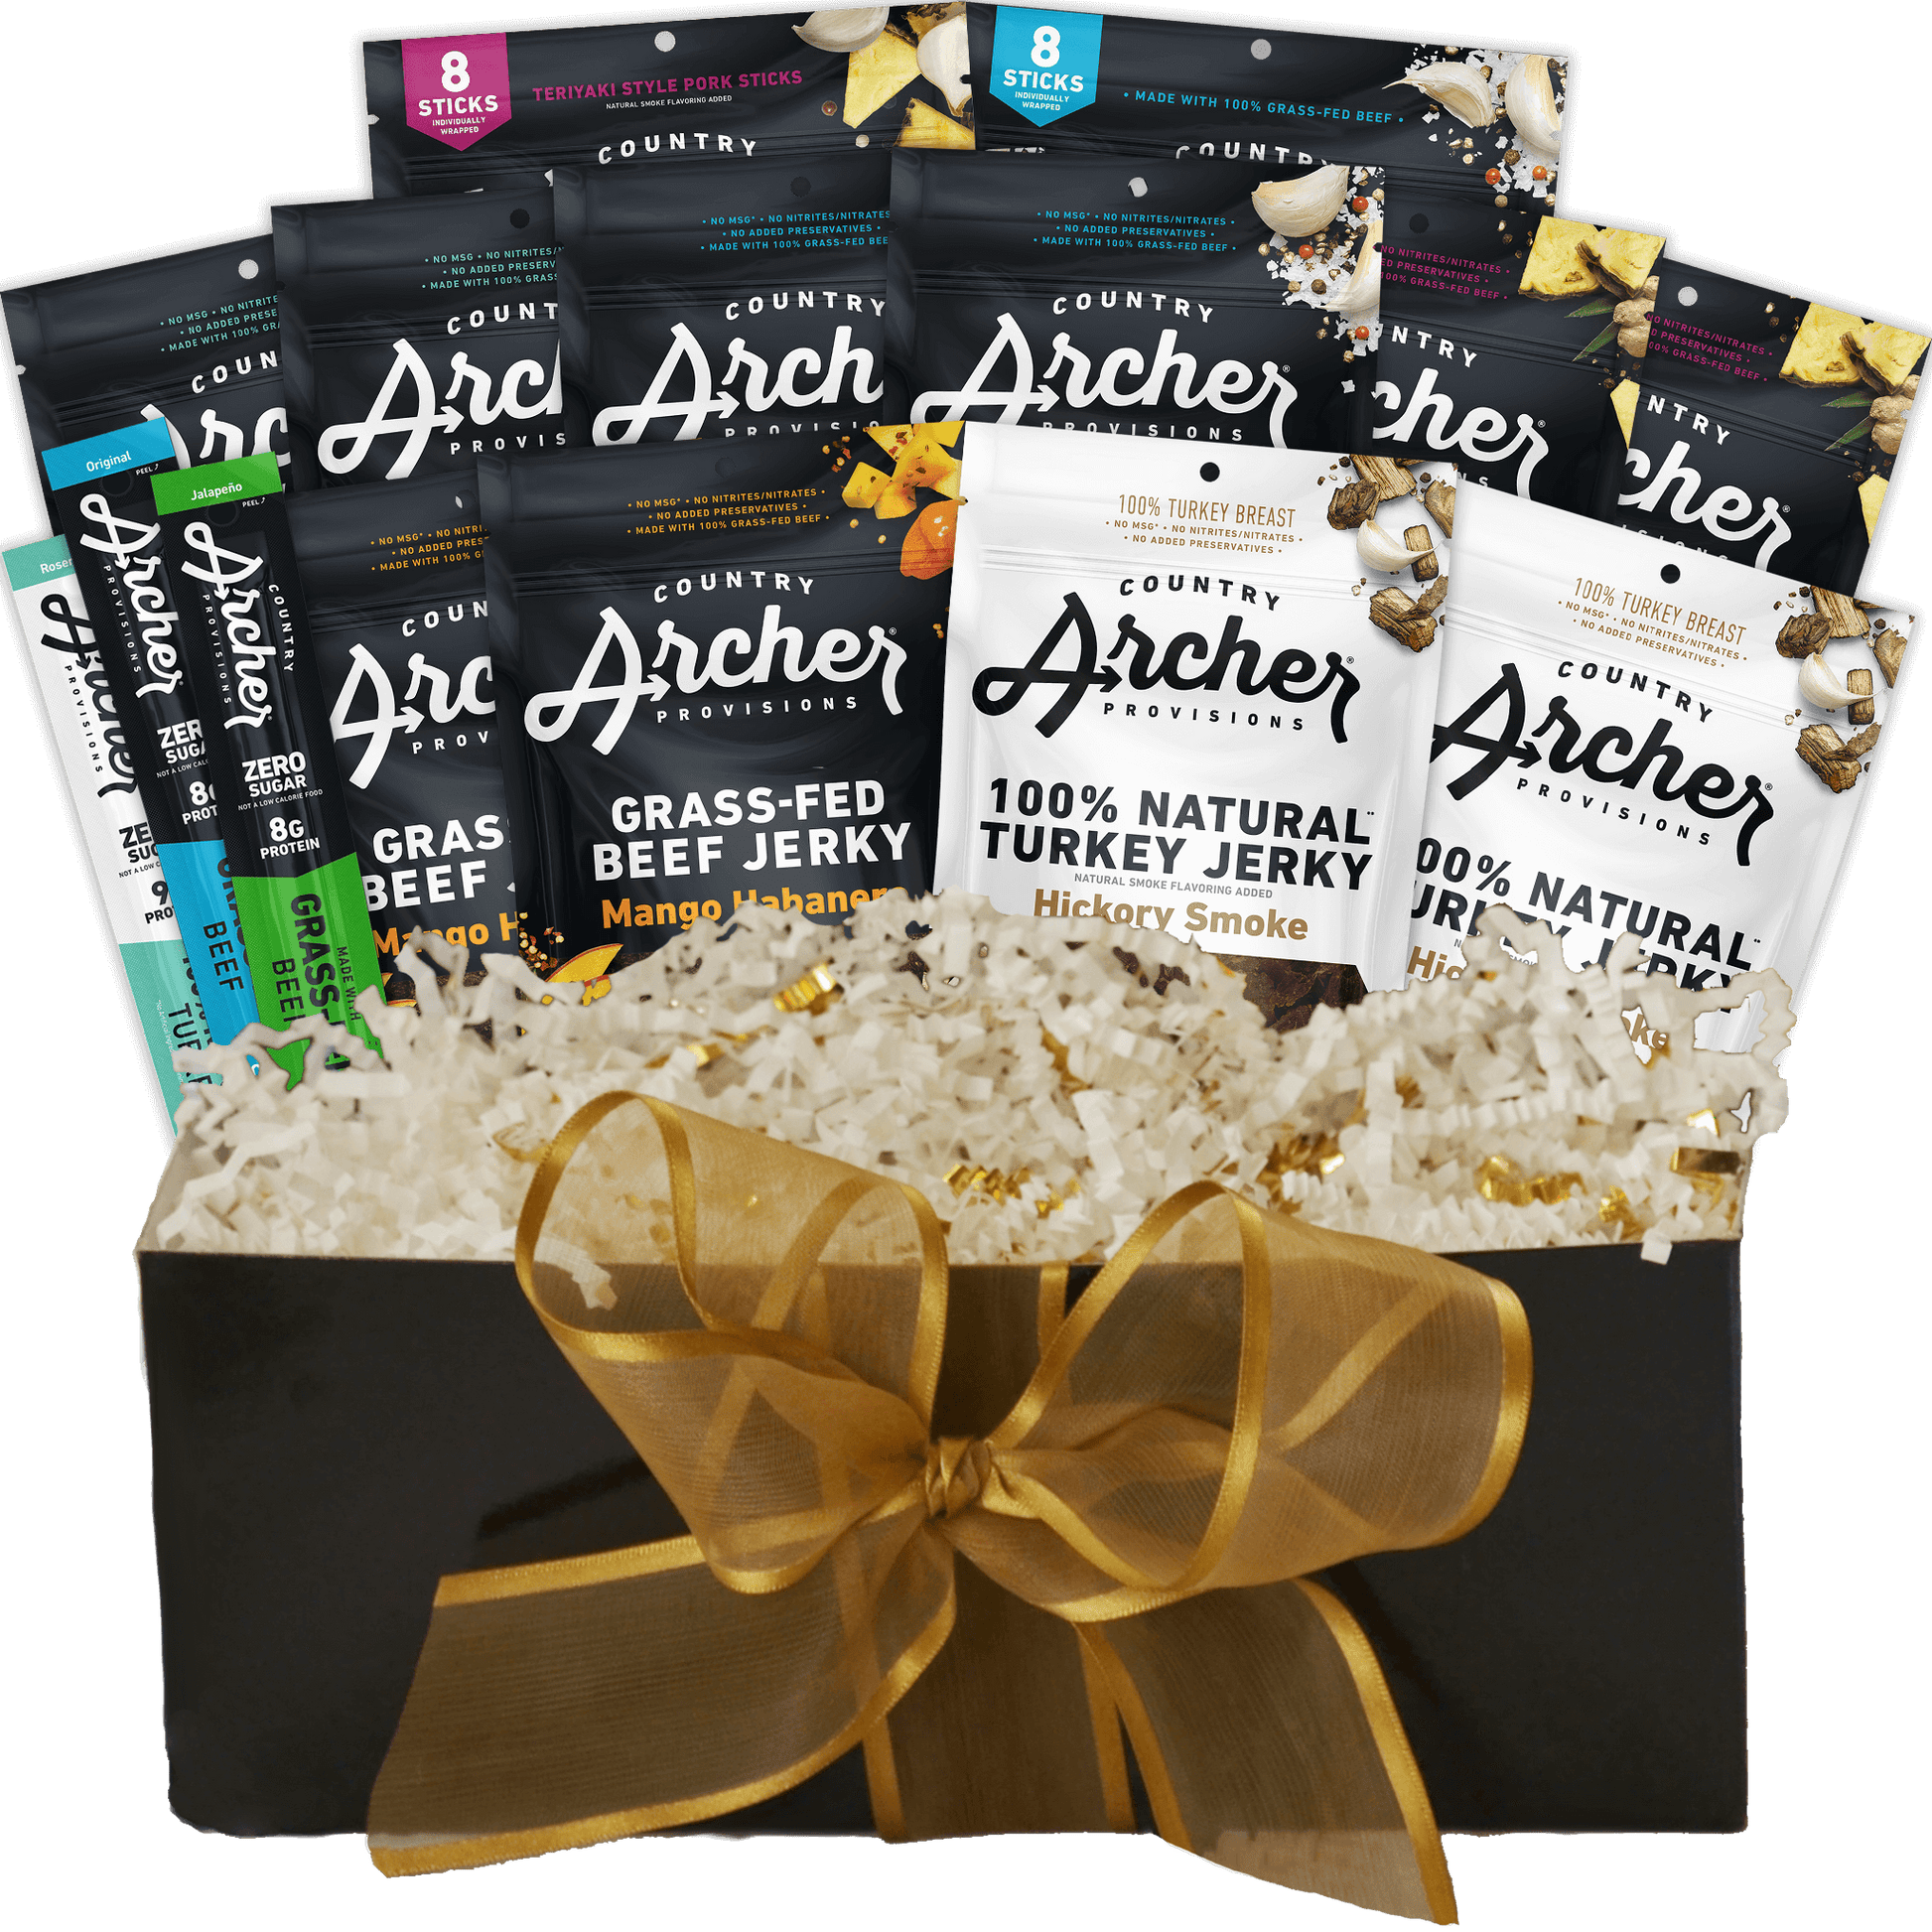 Jerky WOW Holiday Gift Box includes: Original Beef Jerky, 2.5 oz Bag (2), Mango Habanero Beef Jerky, 2.5 oz Bag (2),Teriyaki Beef Jerky, 2.5 oz Bag (2),Zero Sugar Classic Beef Jerky, 2 oz Bag (1),Hickory Smoke Turkey Jerky, 2.5 oz Bag (1),Original Minis, 8 oz Bag (1),Teriyaki Minis, 8 oz Bag (1), Original Beef Jerky Stick, 1 oz (1),Rosemary Turkey Jerky Meat Stick, 1 oz. (1),Jalapeno Beef Jerky Stick, 1 oz. (1). All items are Grass-fed Beef. Please note: Box color and ribbon may change.